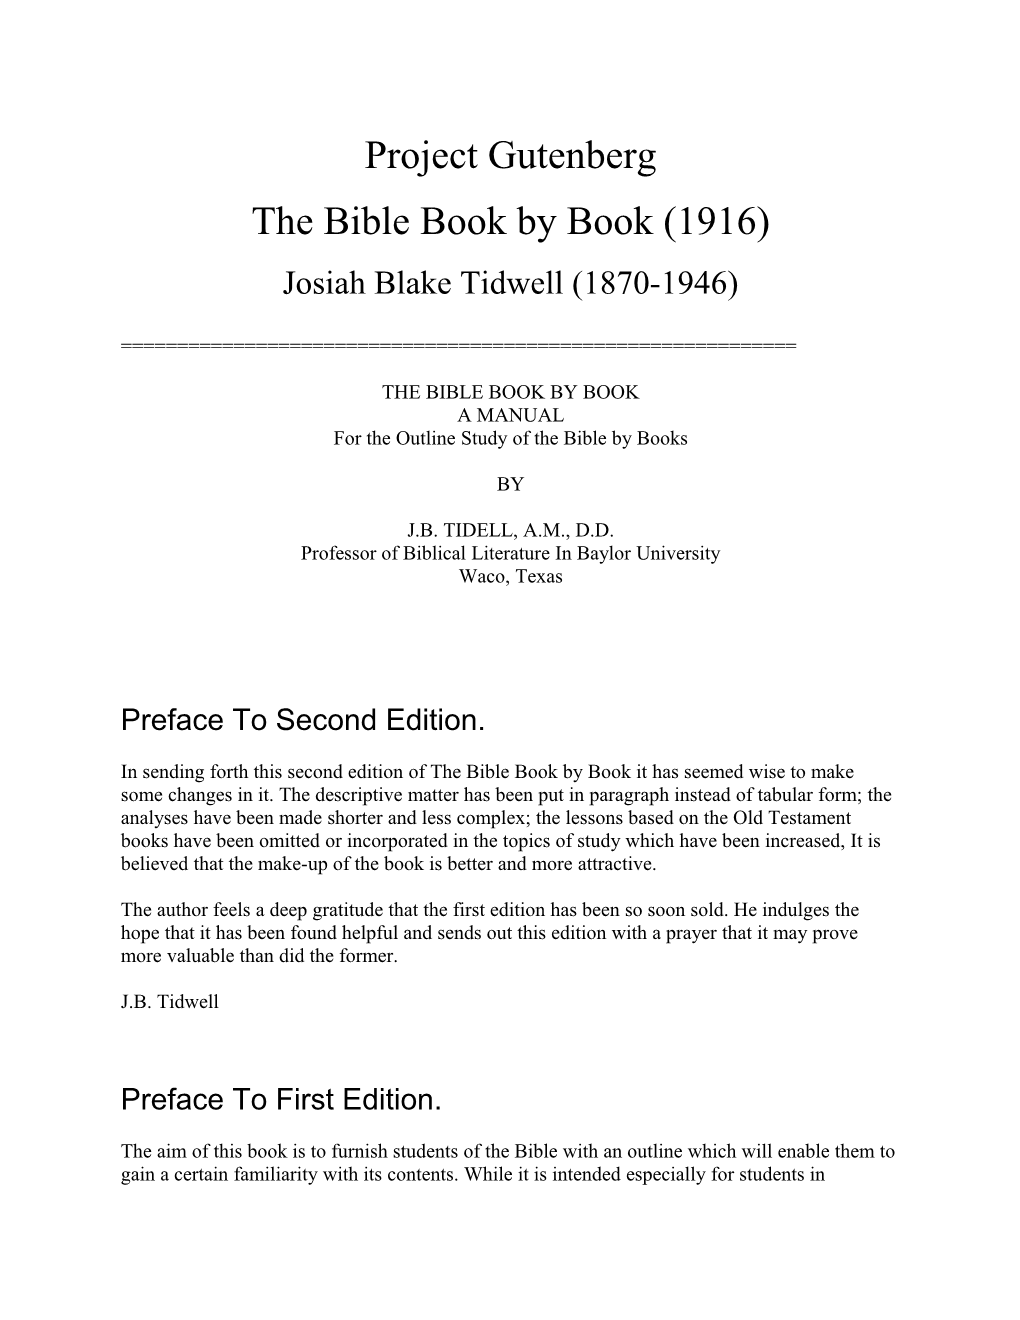 The Bible Book by Book (1916)